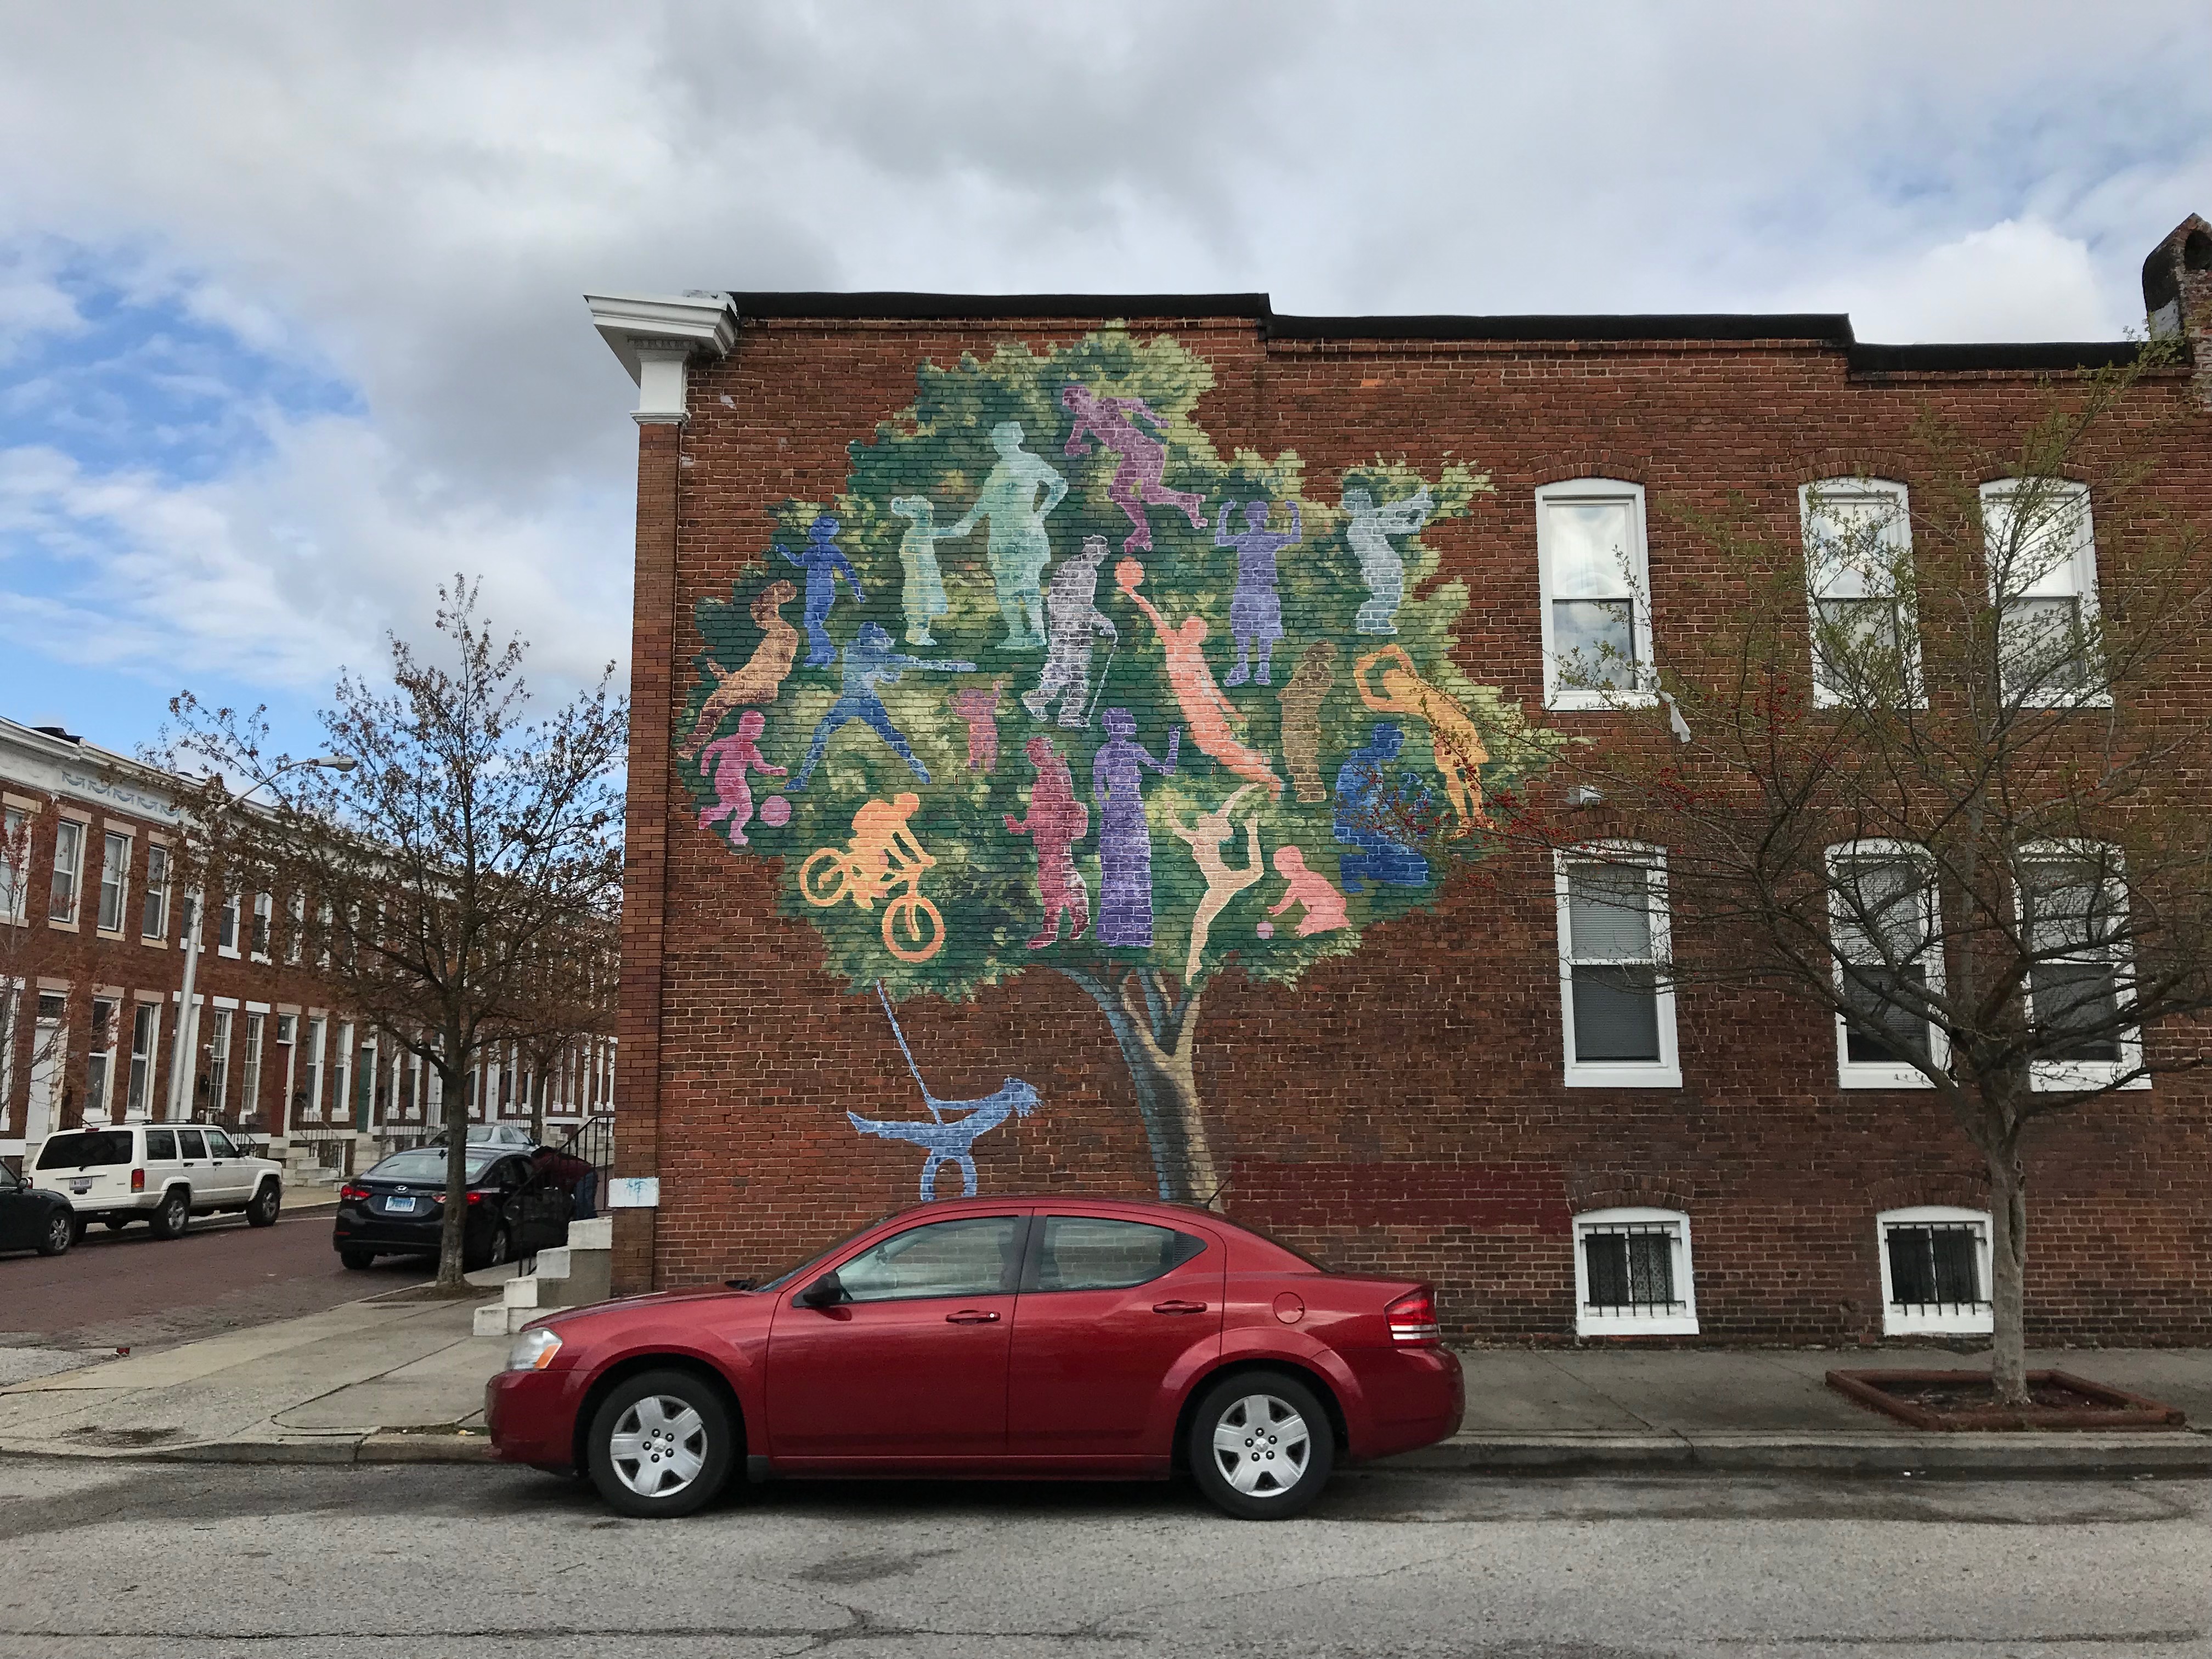 Rowhouses and mural, 401 E. Whitridge Avenue, Baltimore, MD 21218, Baltimore, Barclay Street, Car, Charles Village, HQ Photo